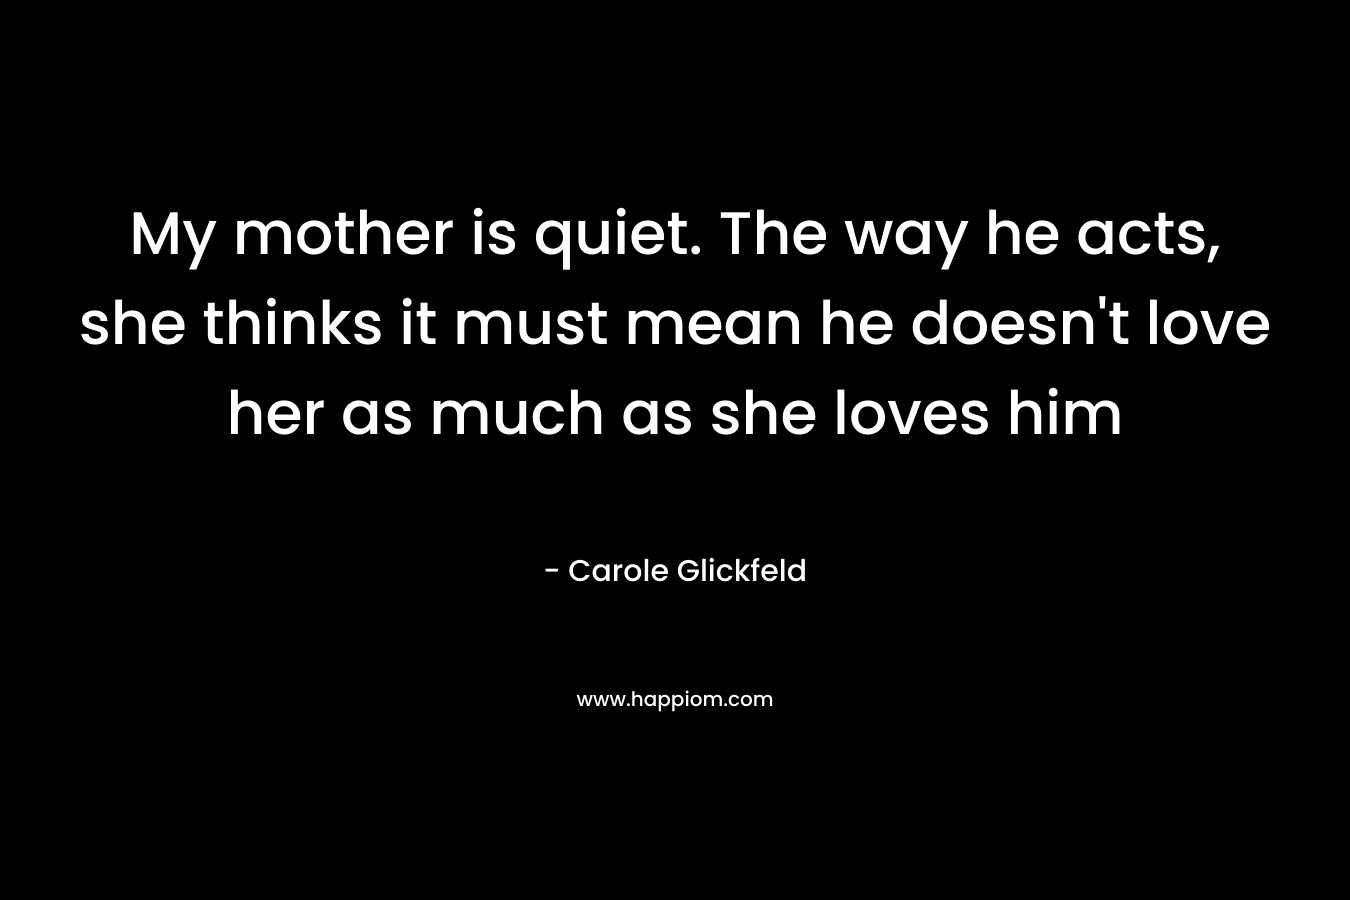 My mother is quiet. The way he acts, she thinks it must mean he doesn’t love her as much as she loves him – Carole Glickfeld